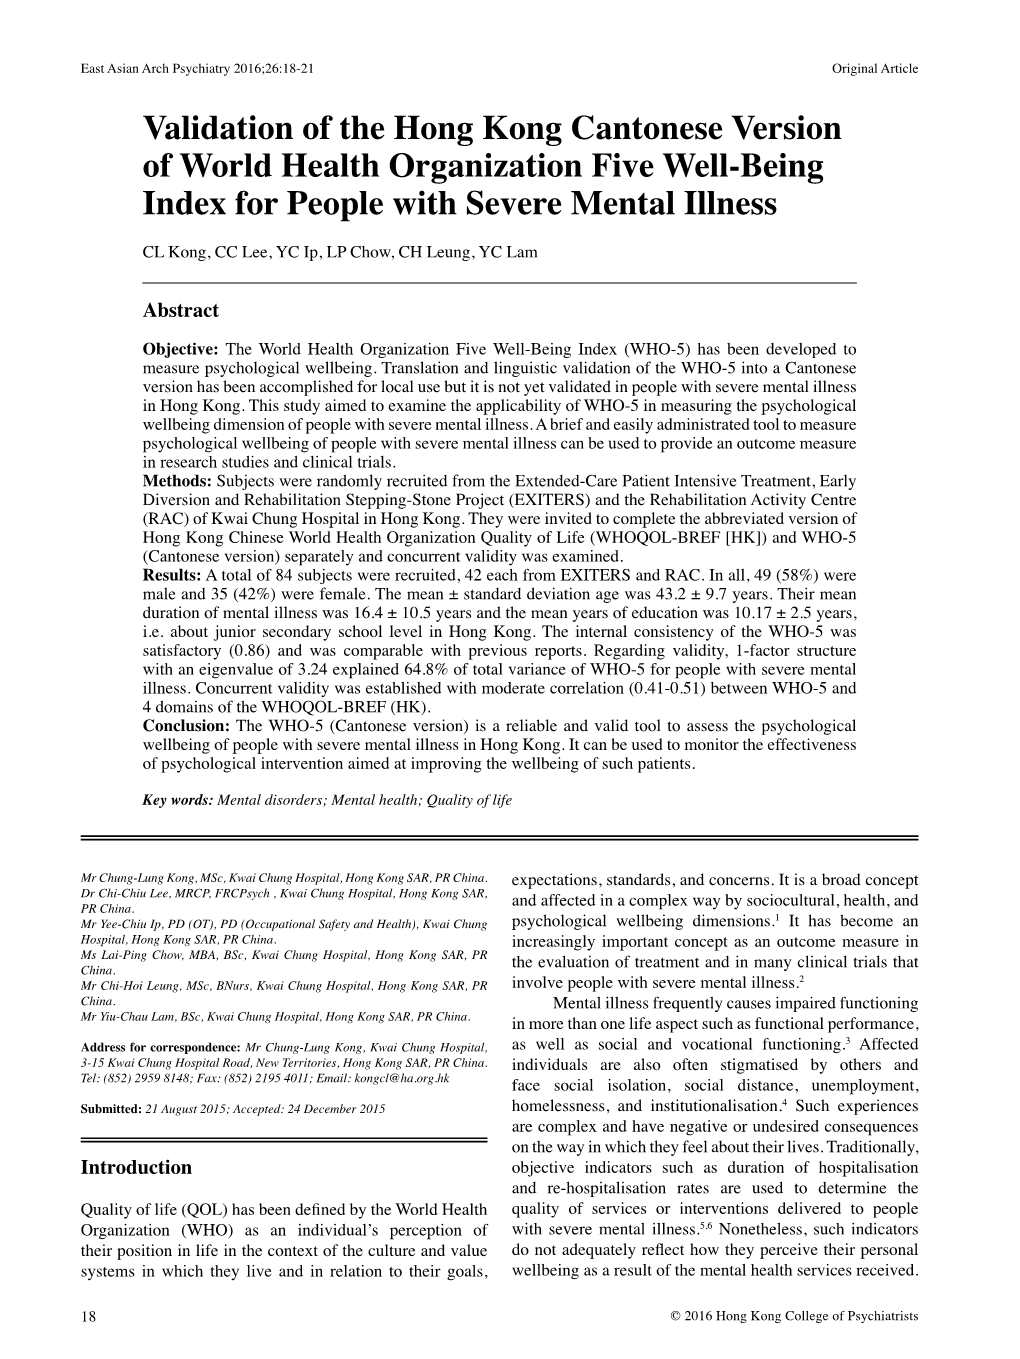 Validation of the Hong Kong Cantonese Version of World Health Organization Five Well-Being Index for People with Severe Mental Illness